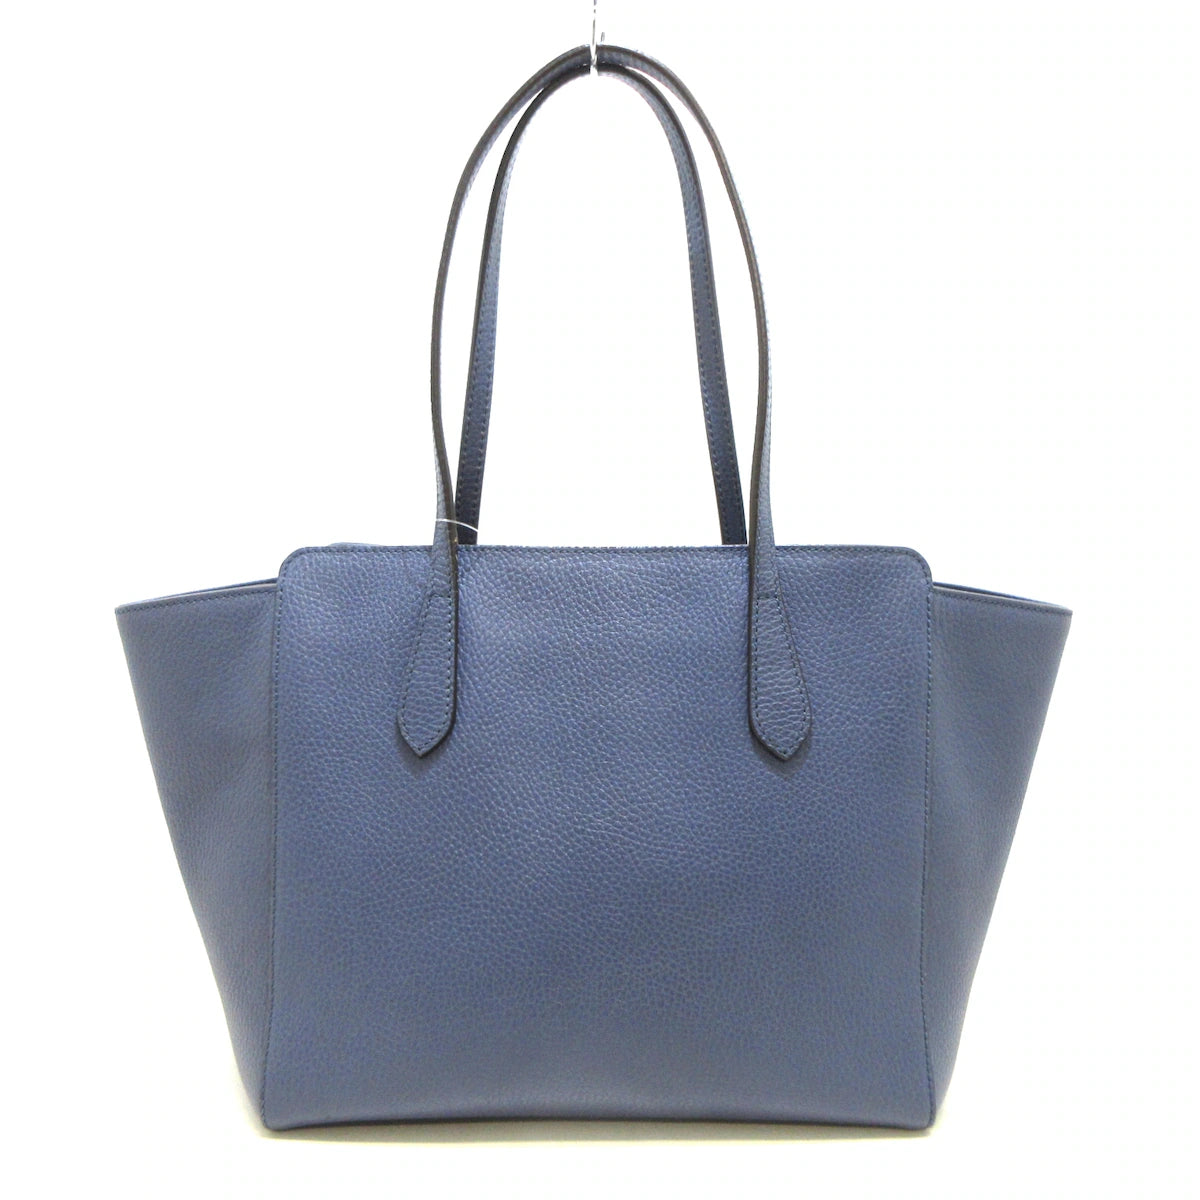 GUCCI - Swing Medium Tote Tote Bag  Navy Leather